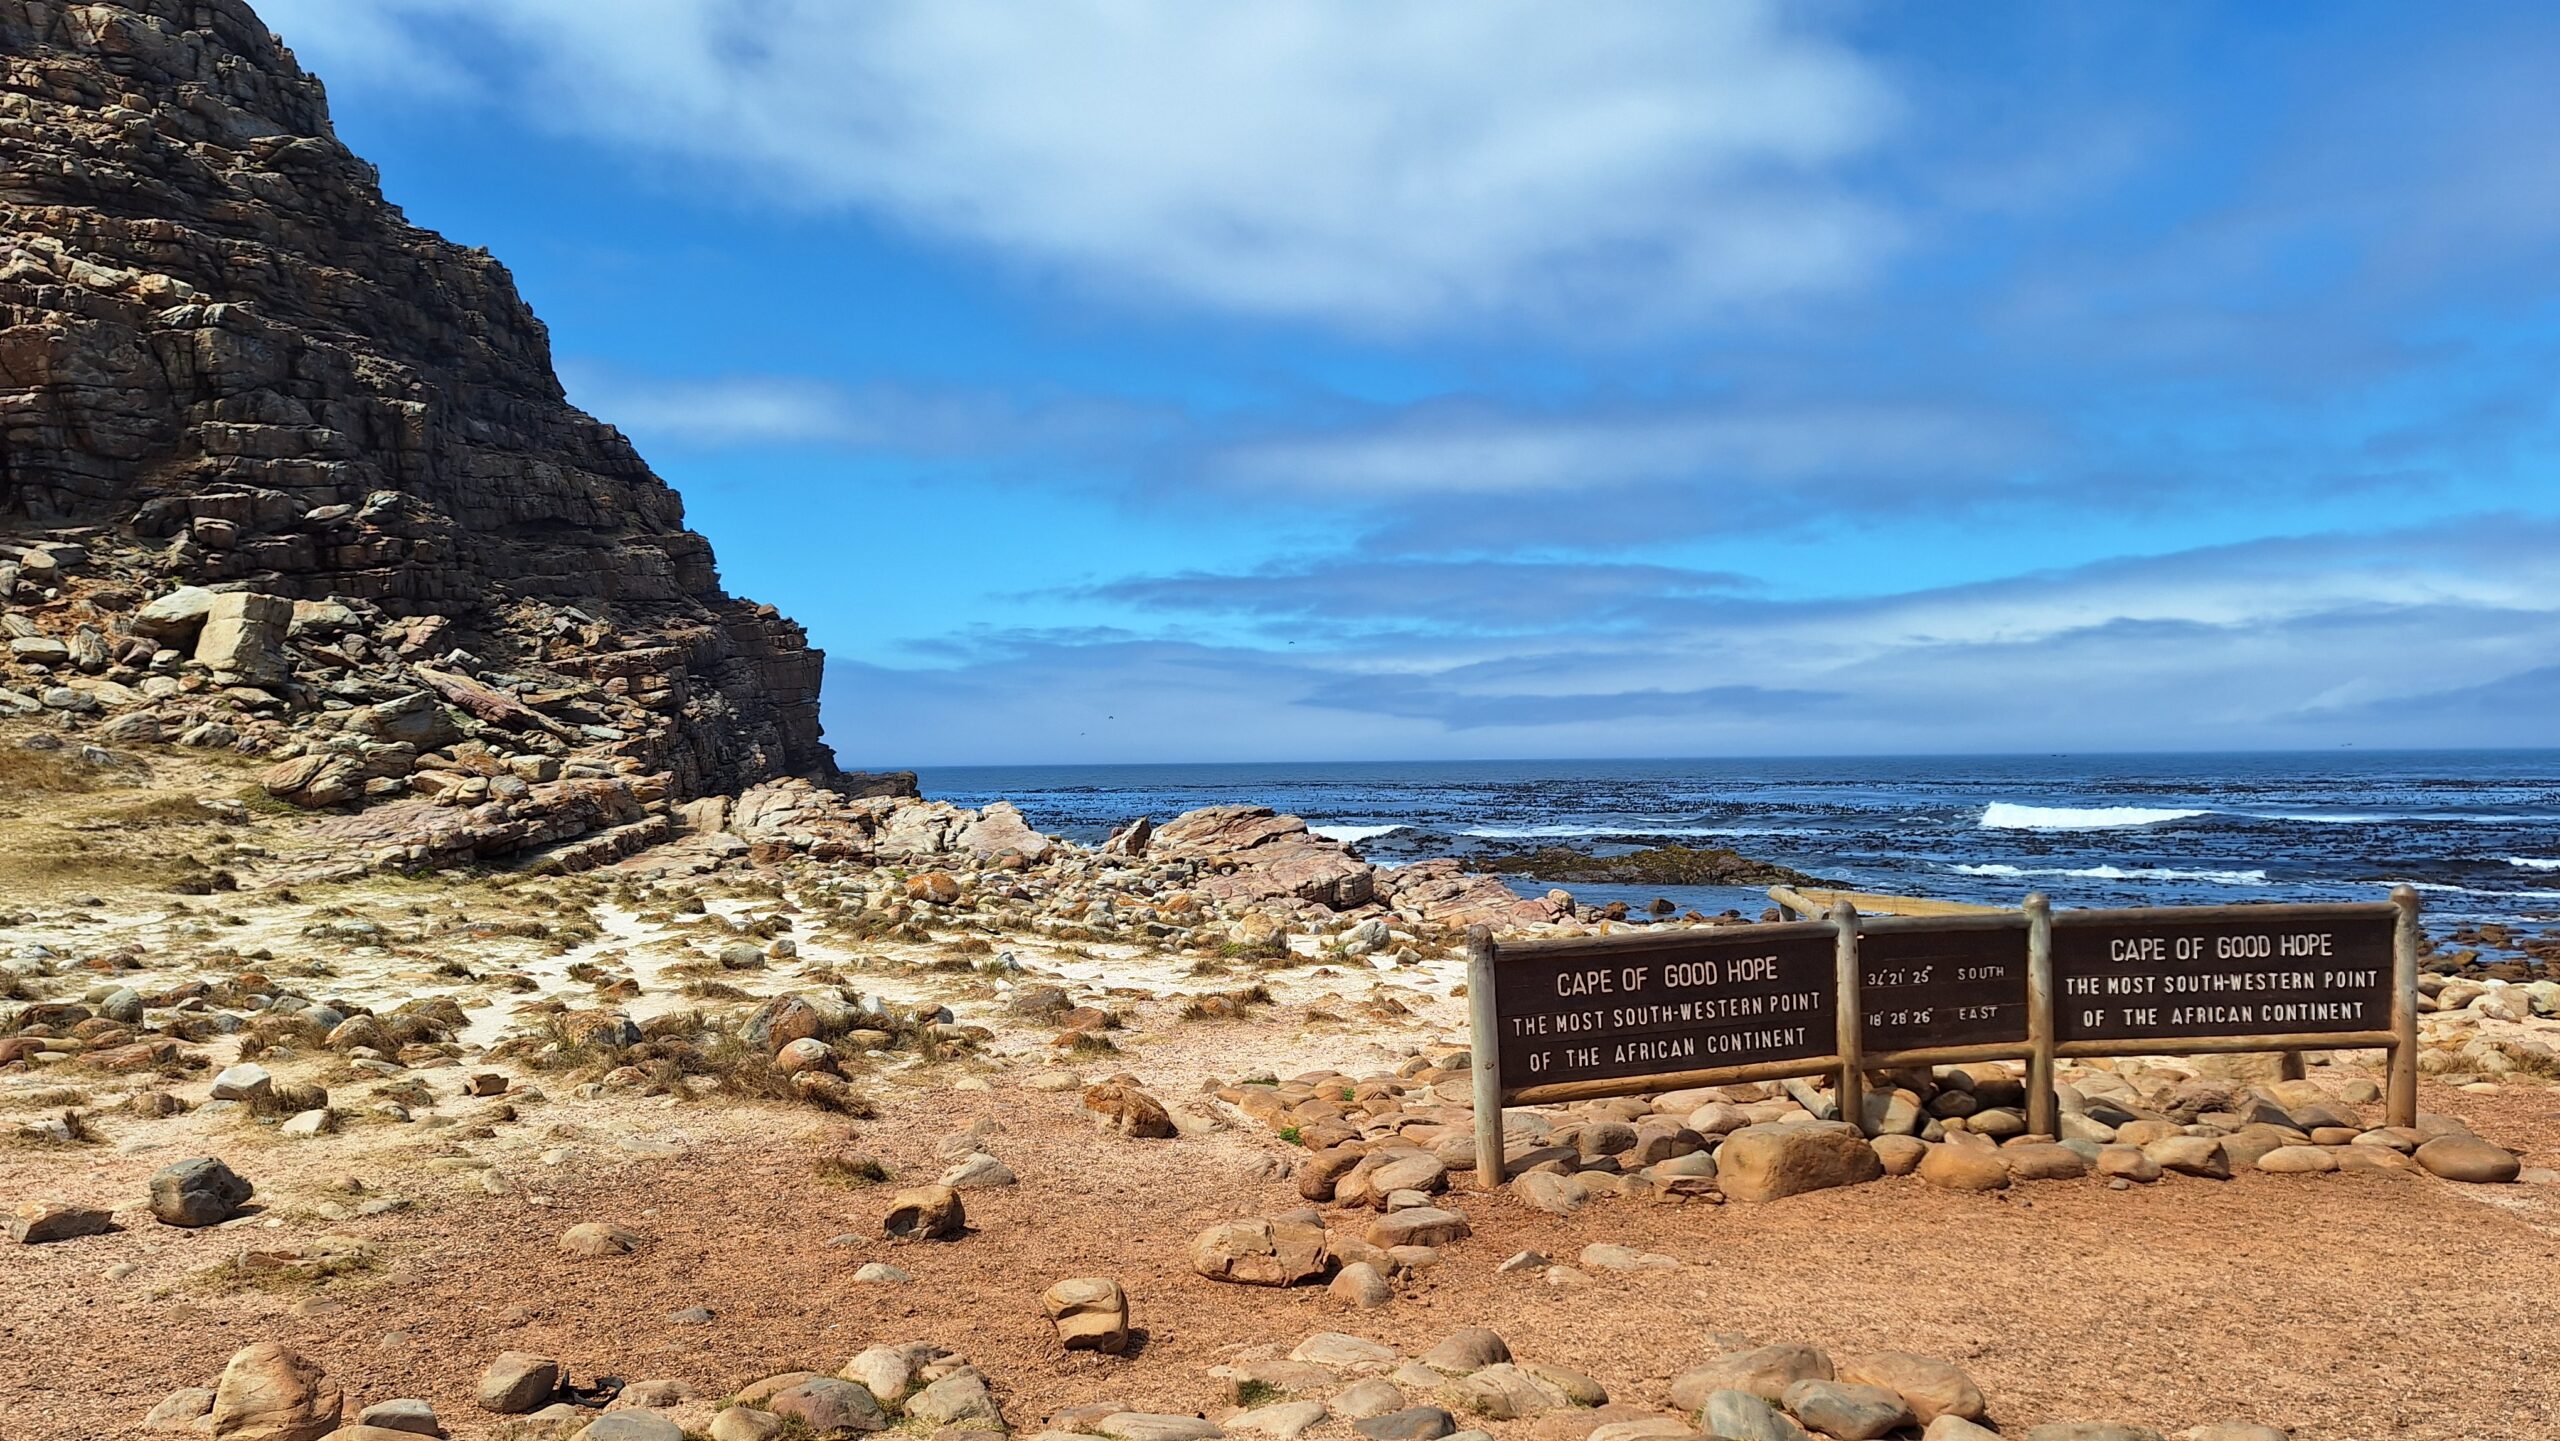 Traveltoer-Cape of Good Hope most south-western point of Africa